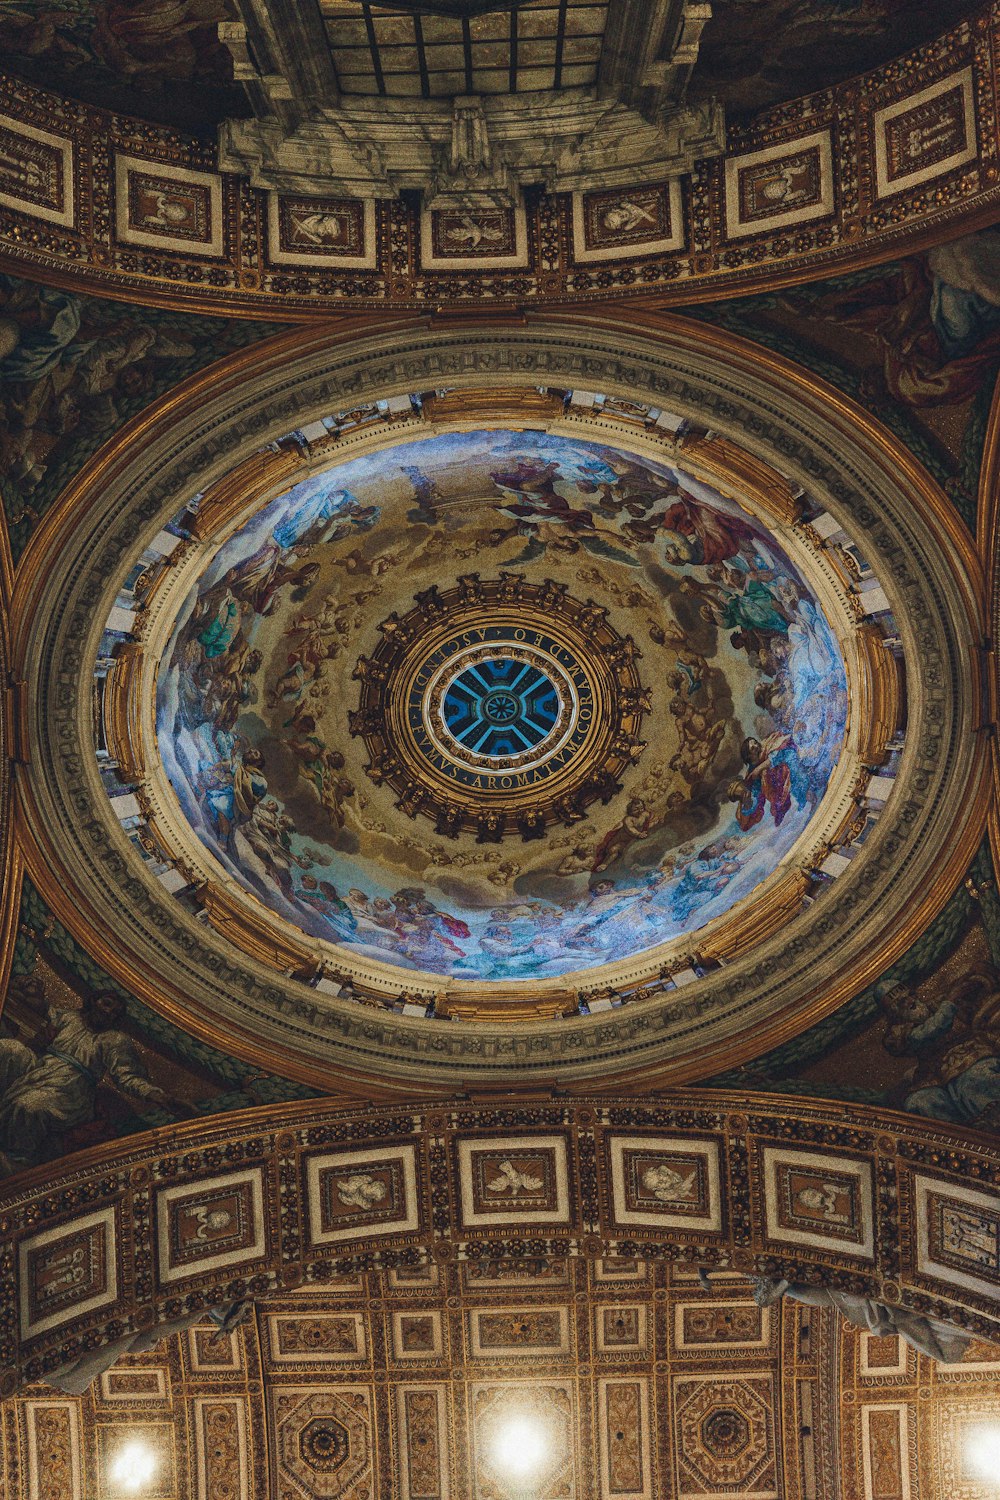 the ceiling of a building with a painted ceiling